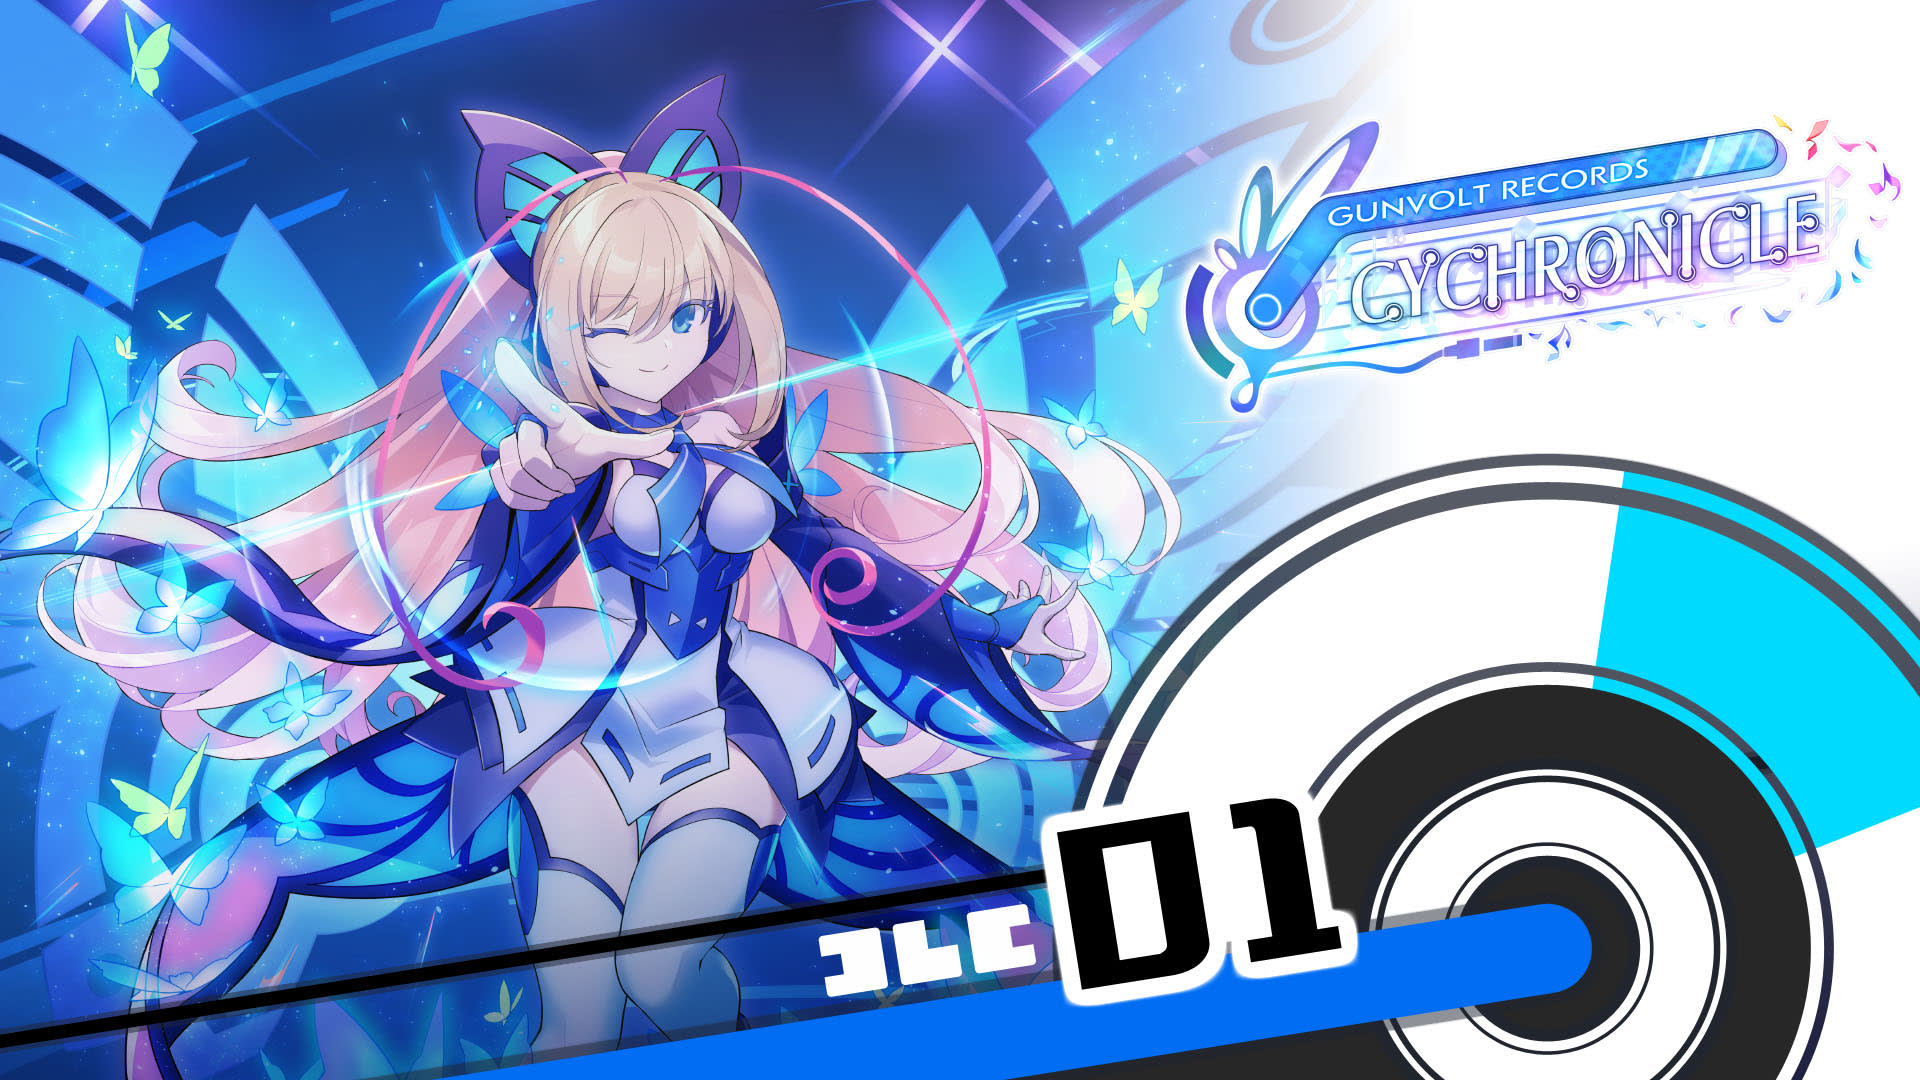 GUNVOLT RECORDS Cychronicle Song Pack 1 Lumen: ♪Rouge Shimmer ♪Parallel World ♪Glass Paradise ♪Last Wish 